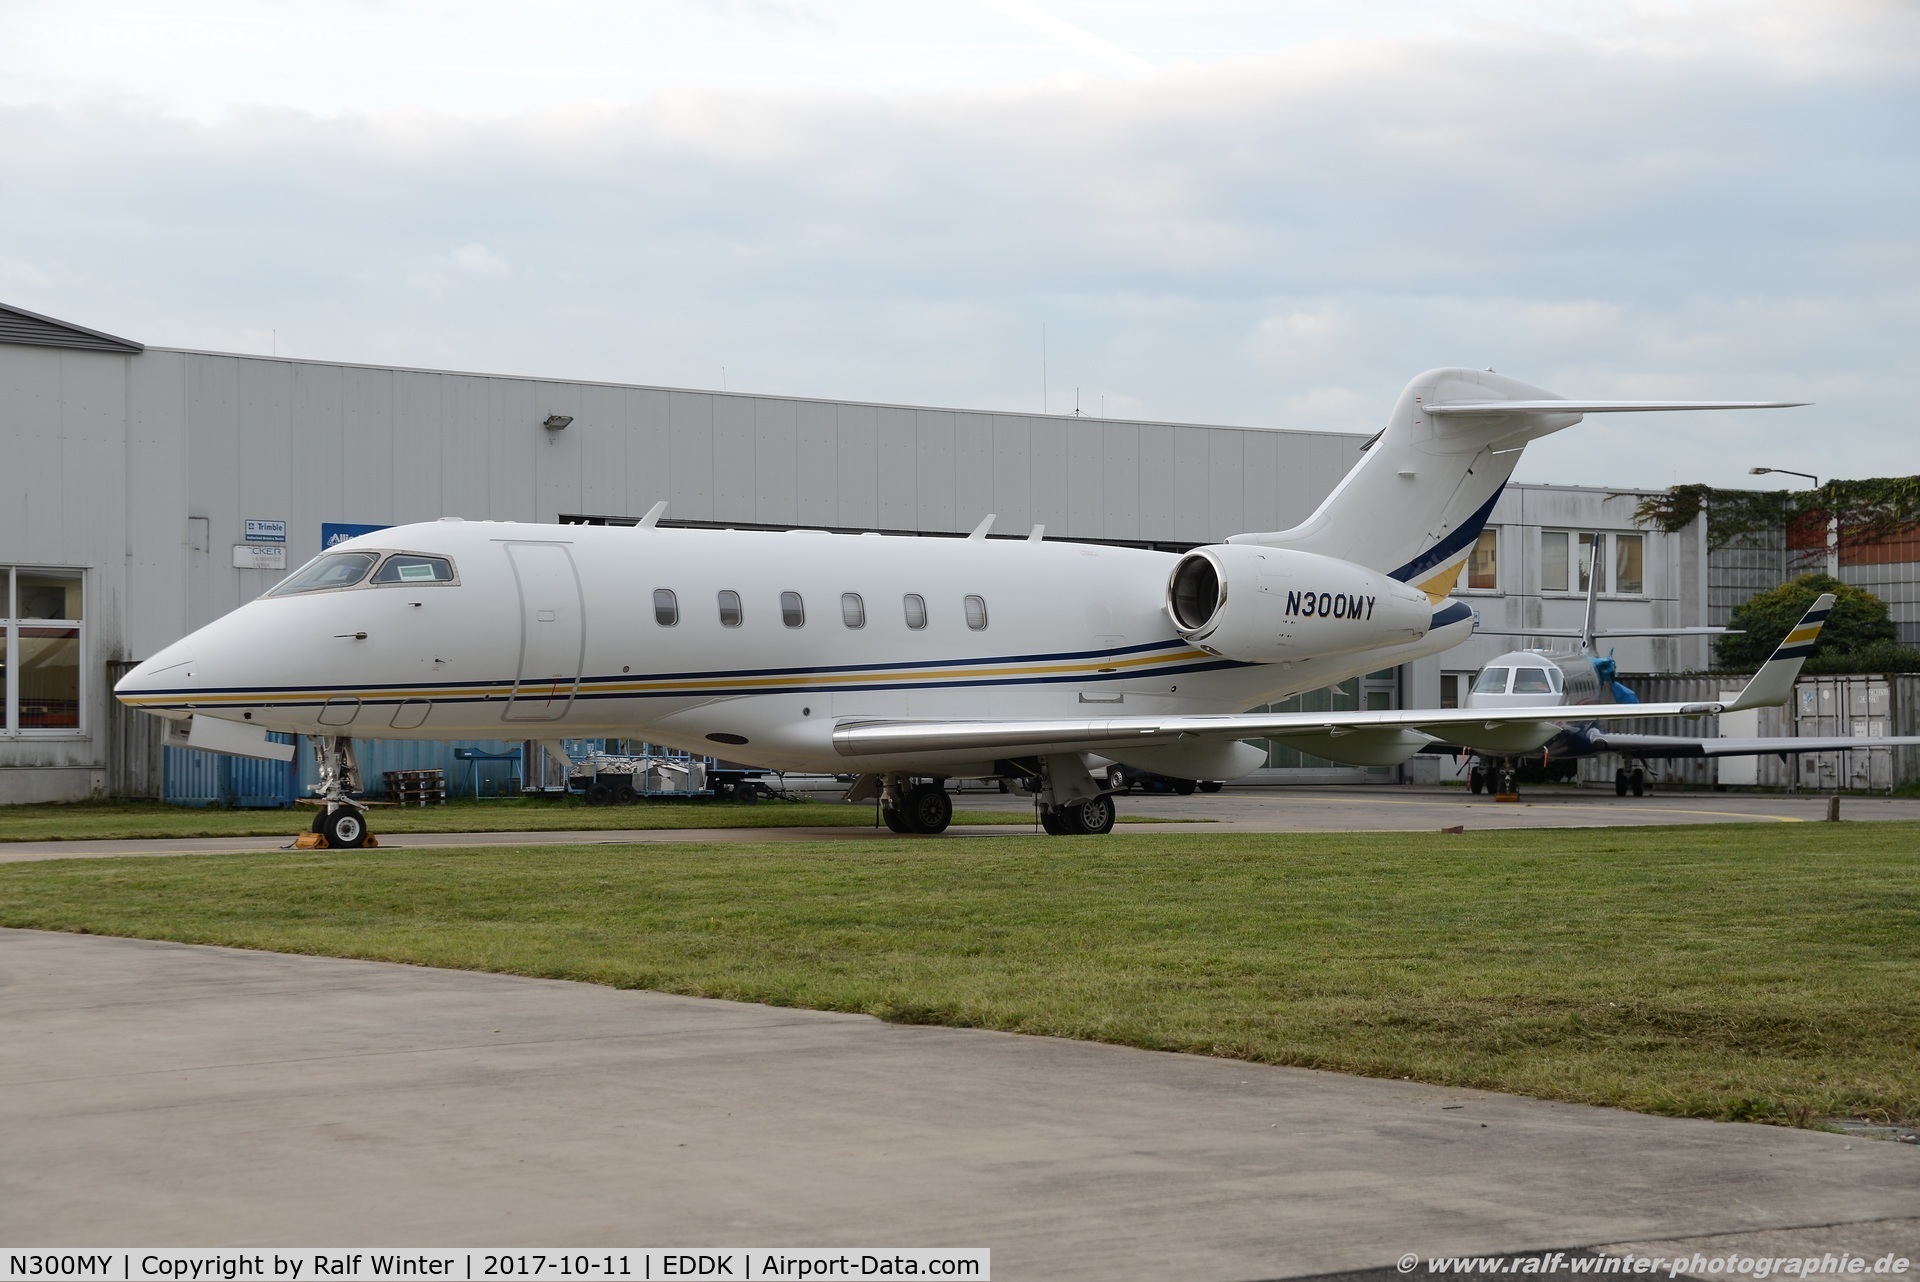 N300MY, 2005 Bombardier Challenger 300 (BD-100-1A10) C/N 20062, Bombardier BD-100-1A10 Challenger 300 - Wells Fargo Bank - 20062 - N300MY - 11.10.2017 - CGN